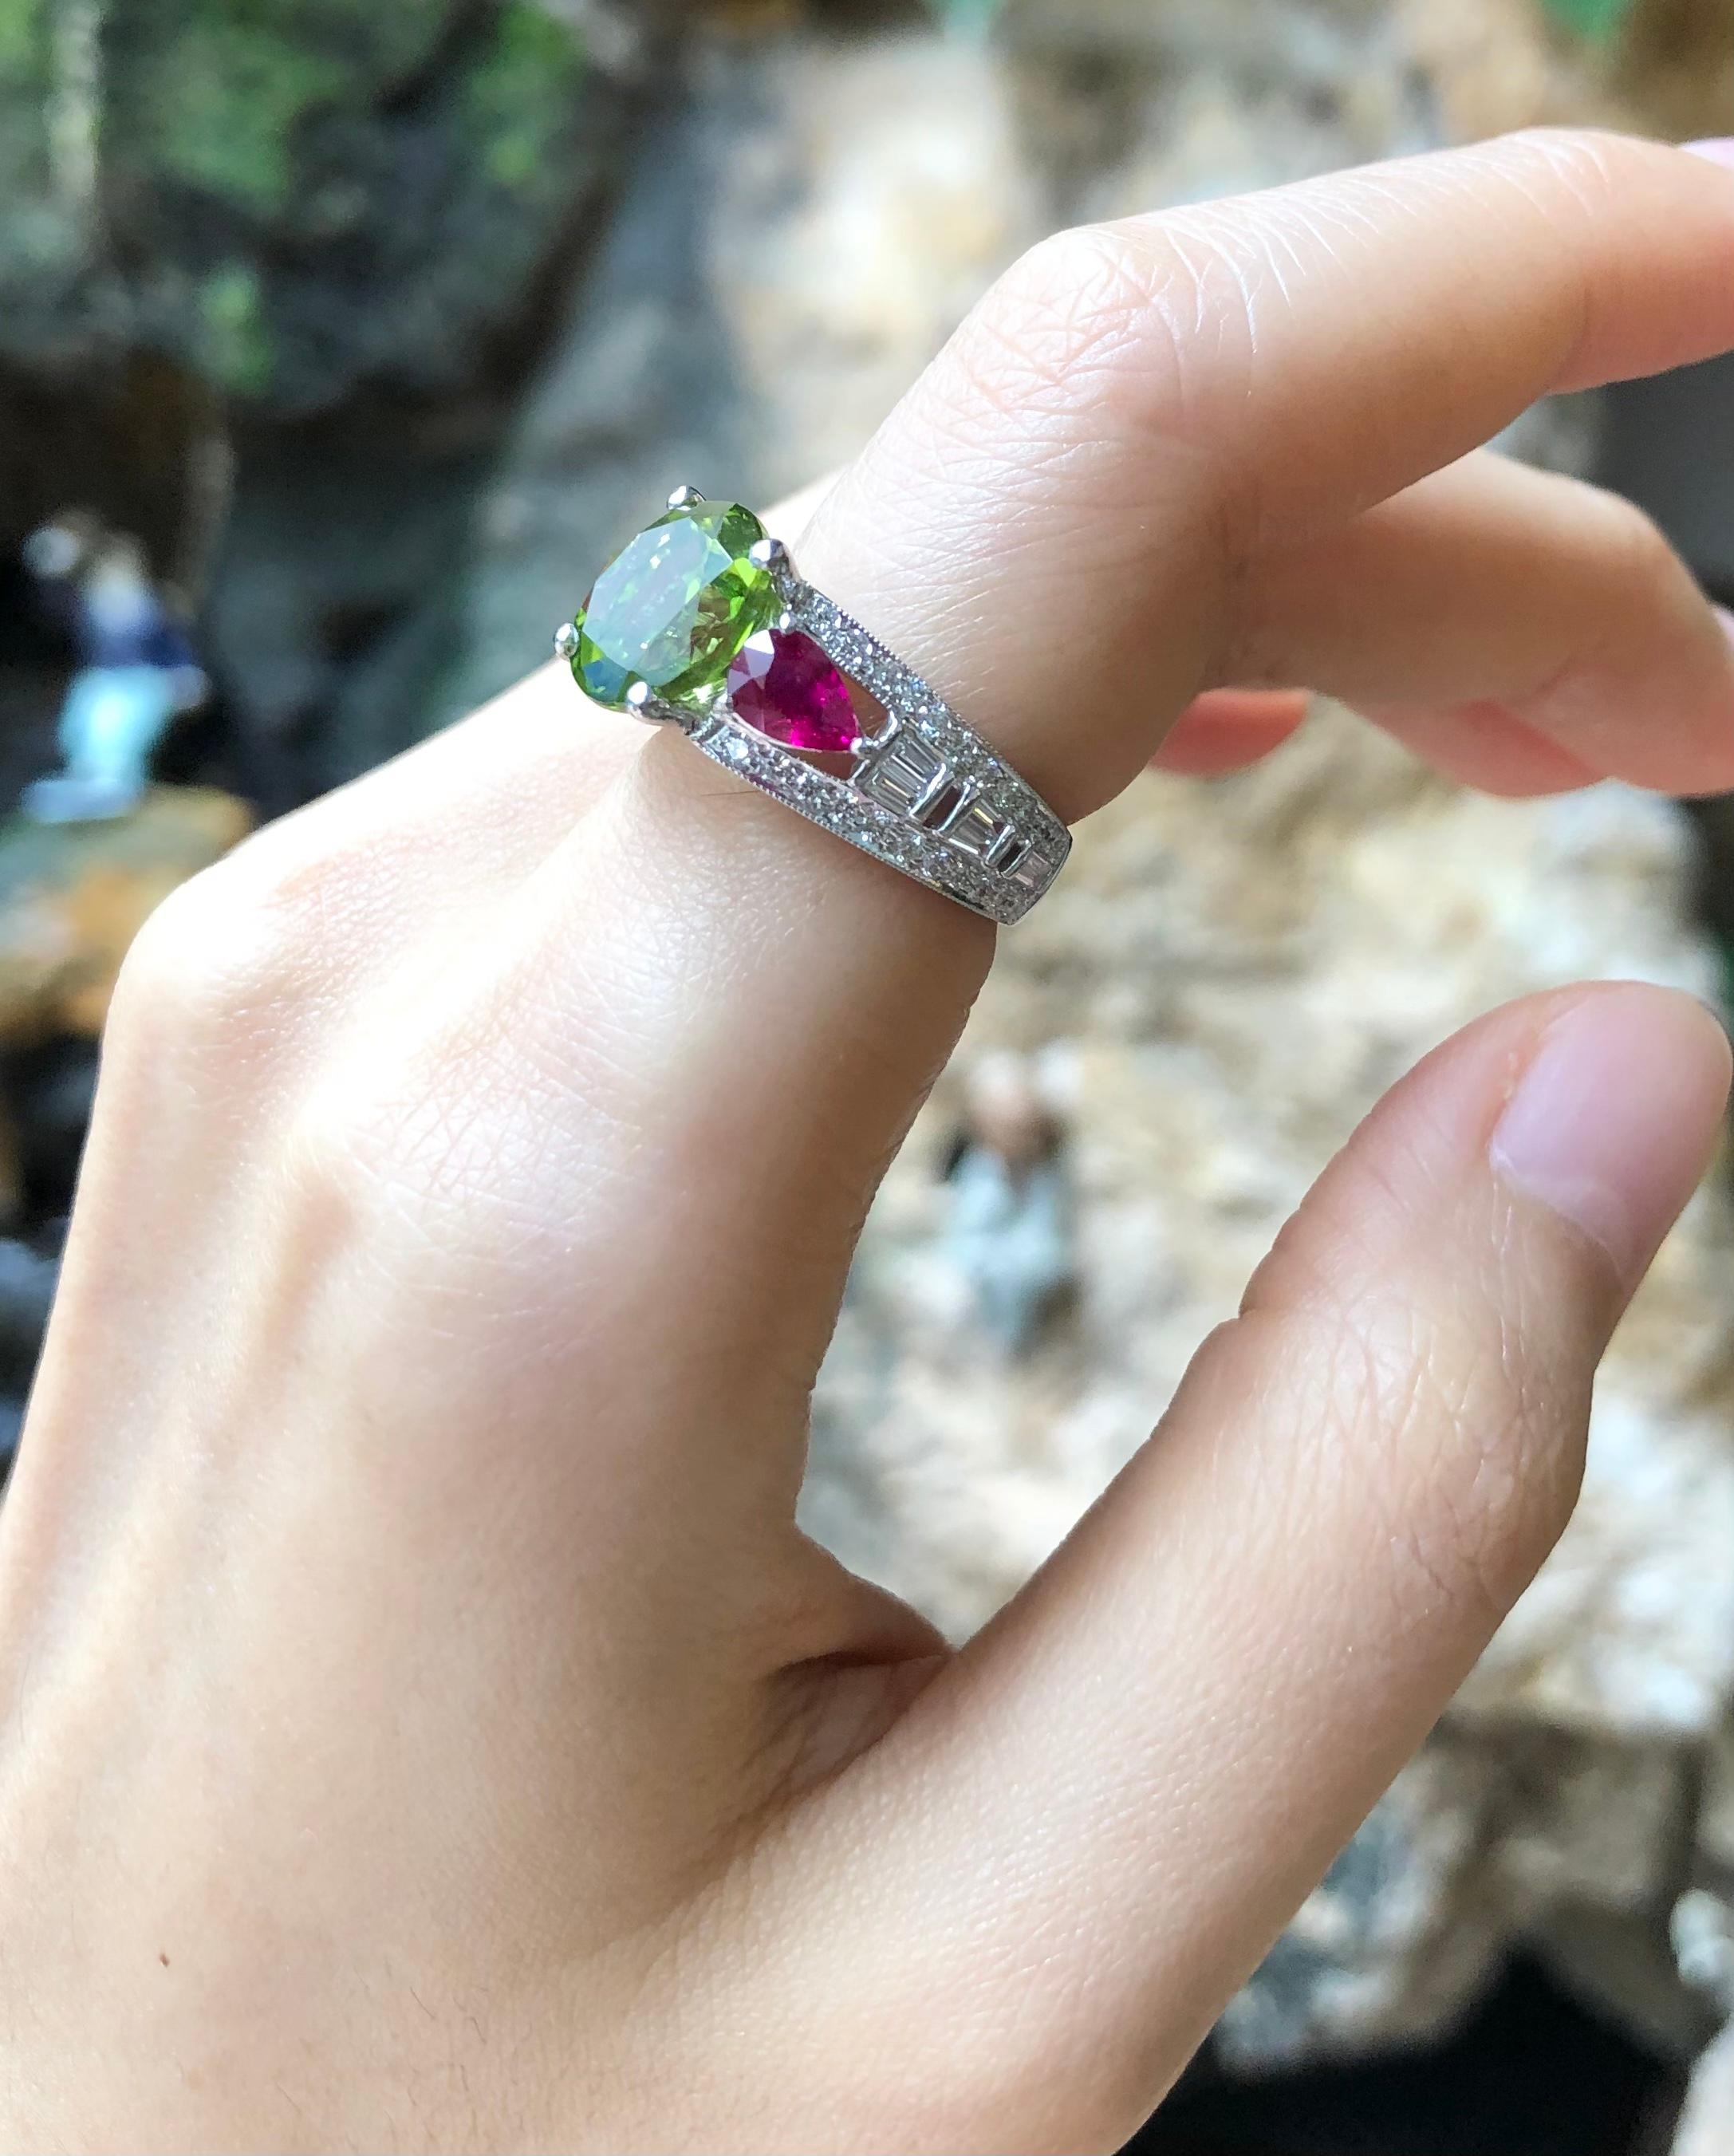 Peridot 4.26 carats with Ruby 1.10 carats and Diamond 0.70 carat Ring set in 18 Karat White Gold Settings

Width:  2.0 cm 
Length:  1.0 cm
Ring Size: 49
Total Weight: 6.88 grams

Peridot
Width:  1.0 cm 
Length:  1.0 cm

